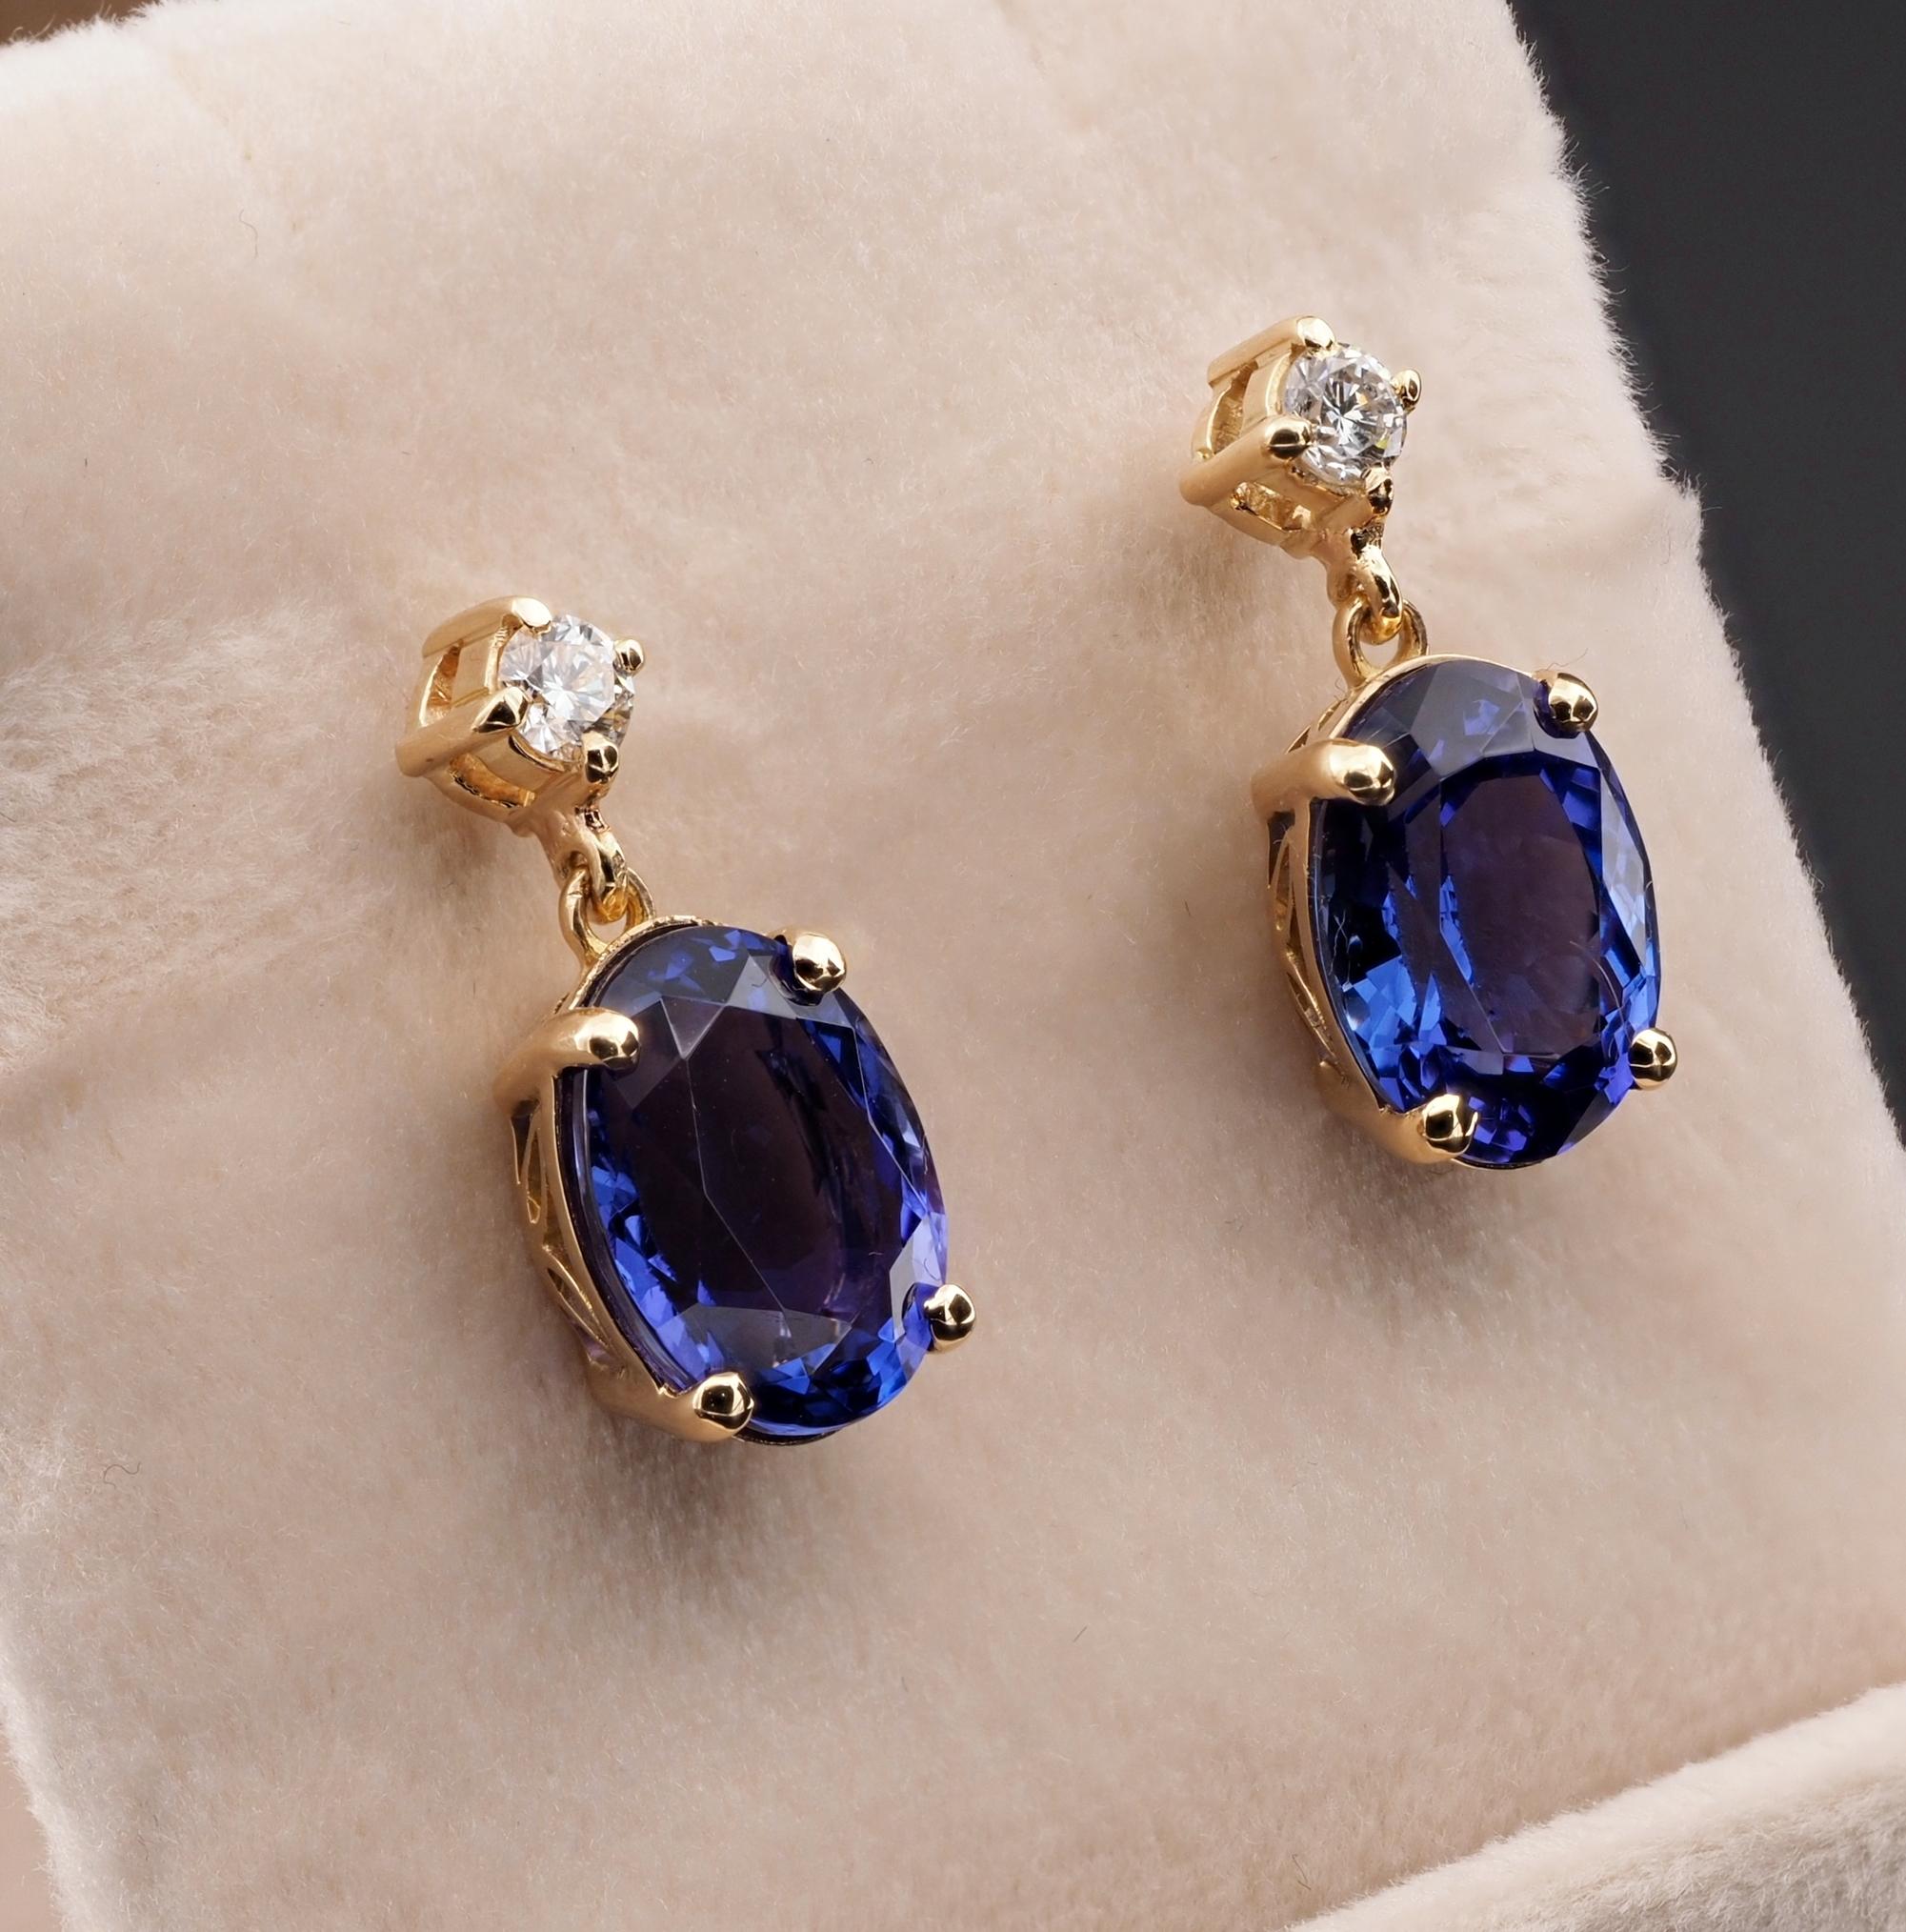 Magic Blue
Contemporary, high quality drop earrings set with mesmerizing natural Tanzanite
Hand fabricated of solid 18 KT gold
Designed in a sleek drop shape, simple, effective and so elegant
They boast two paired, stunning quality, oval cut